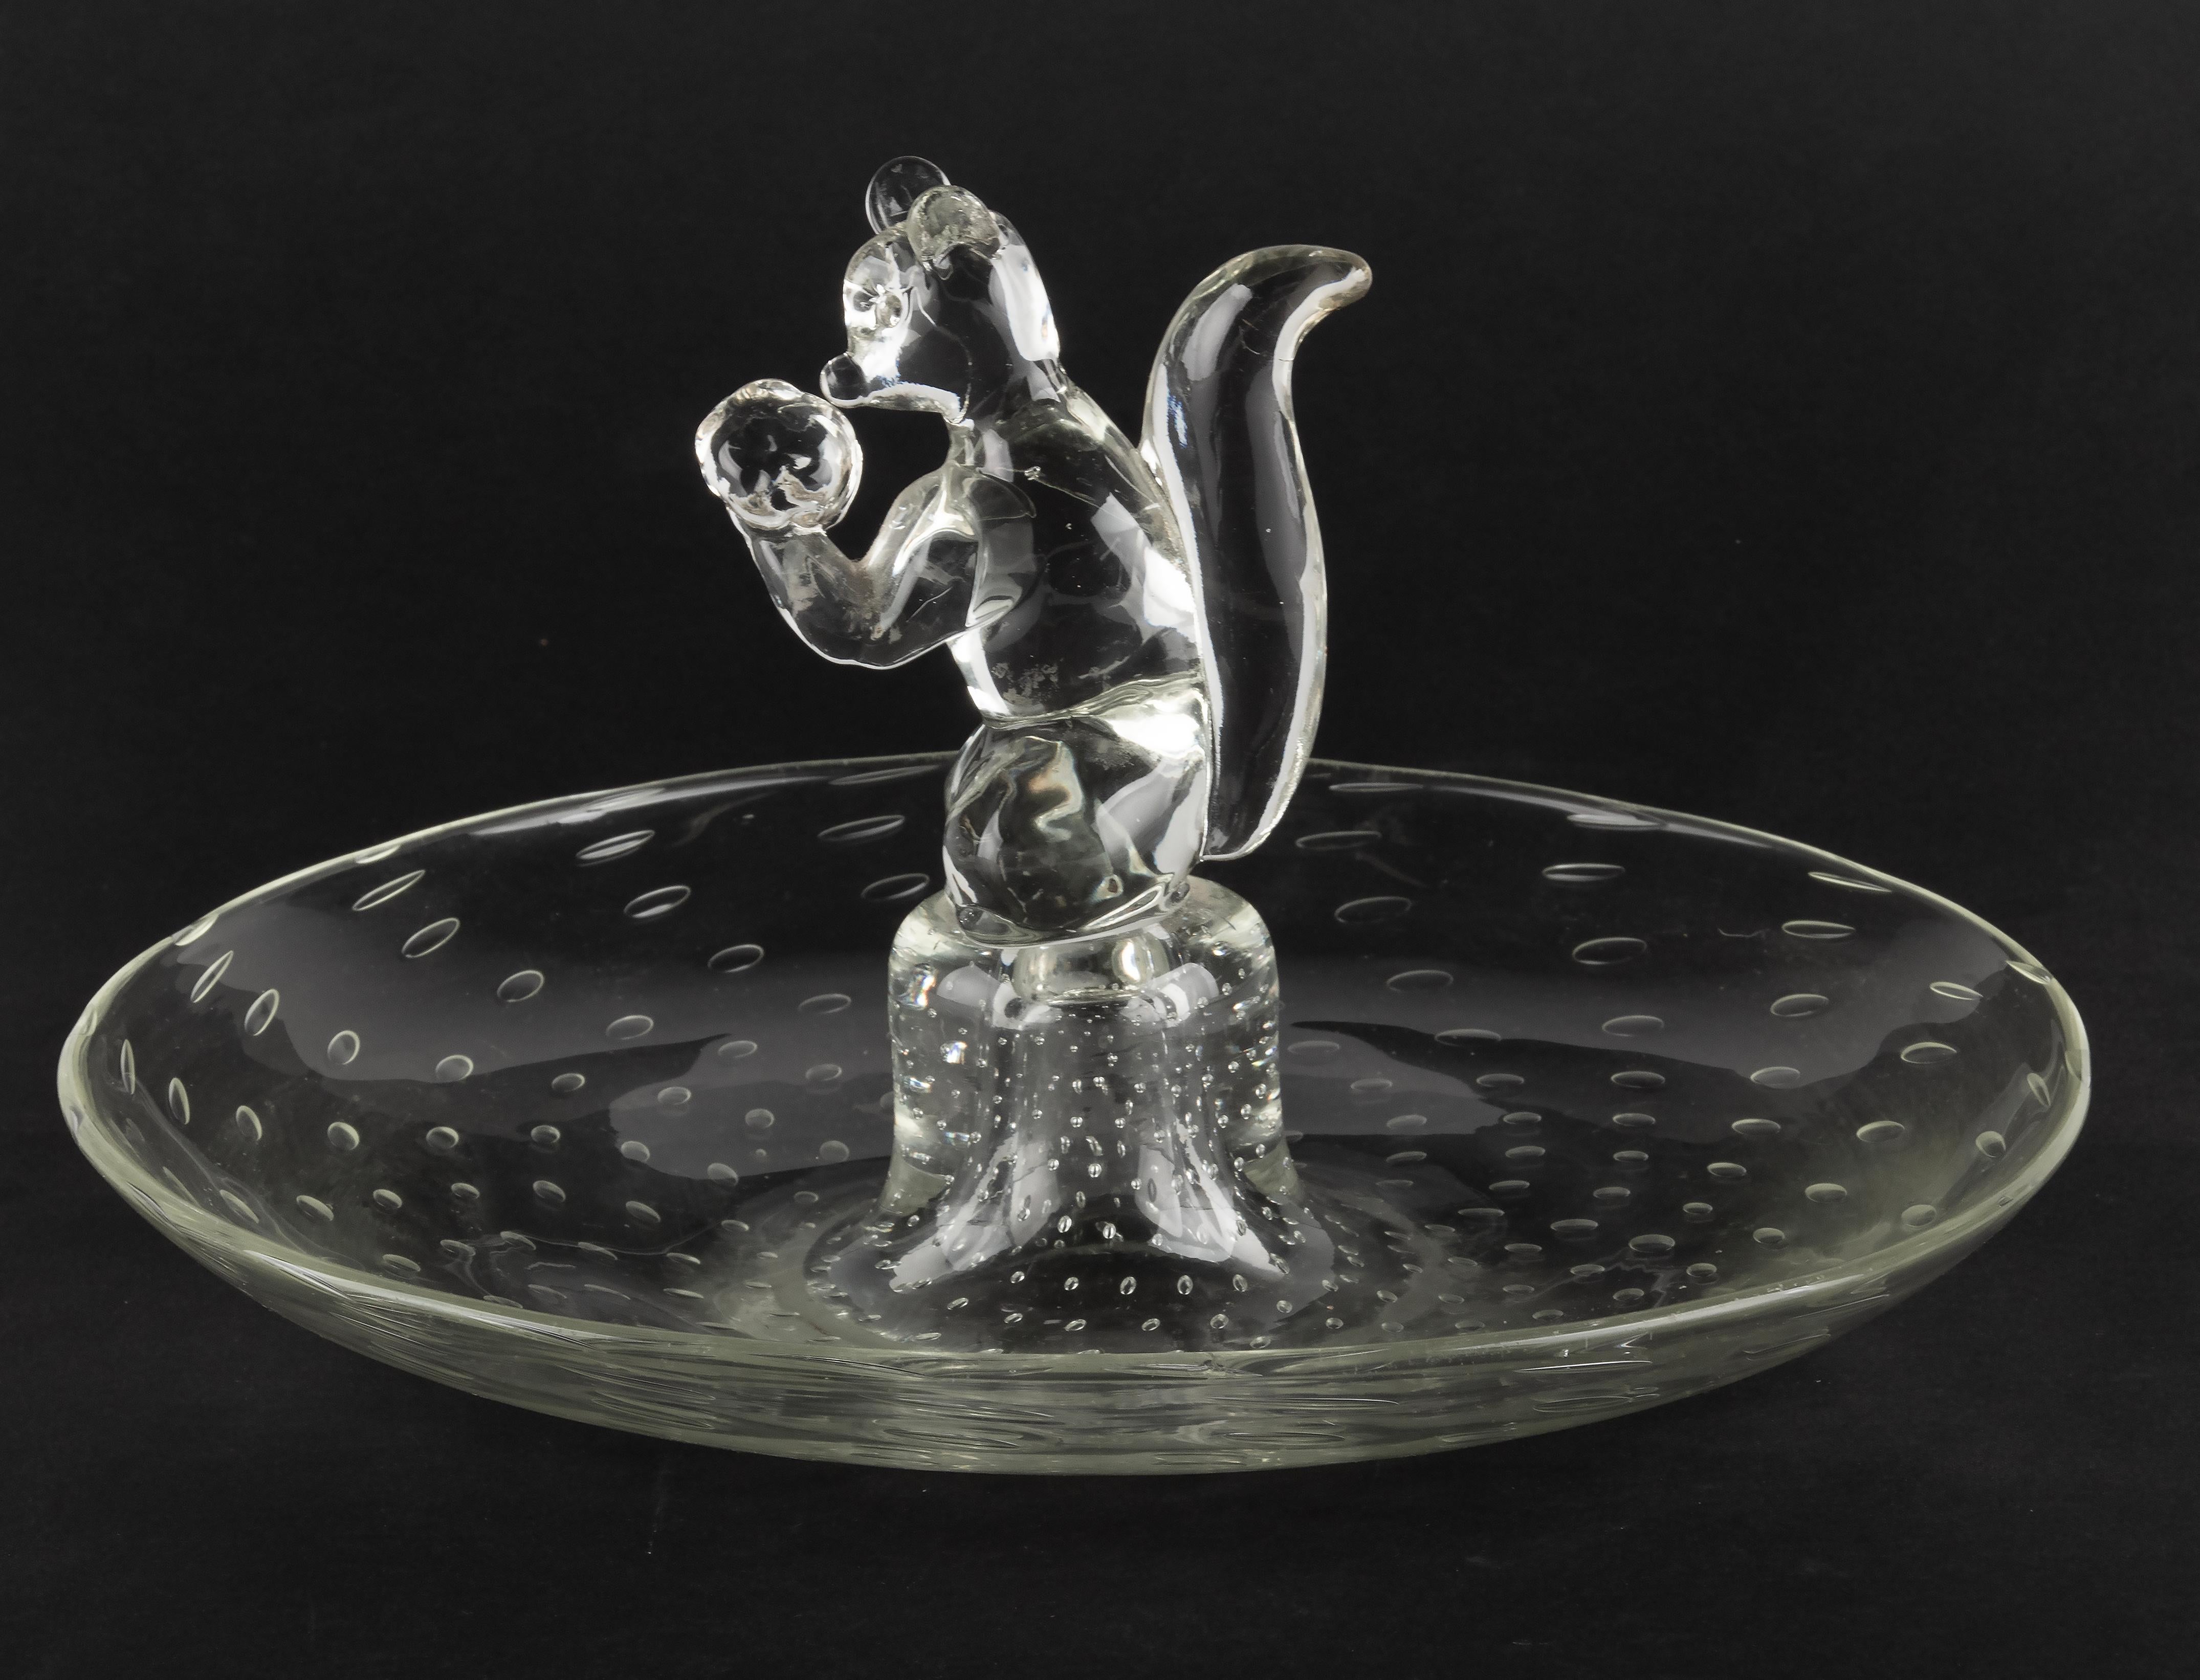 Large Mid-Century Modern Murano glass serving bowl. In the middle a figure of a squirrel. The glass is clear in color with bubble inclusions. A great piece for serving all sorts of nuts. The dish is in good condition, only some scratches on the